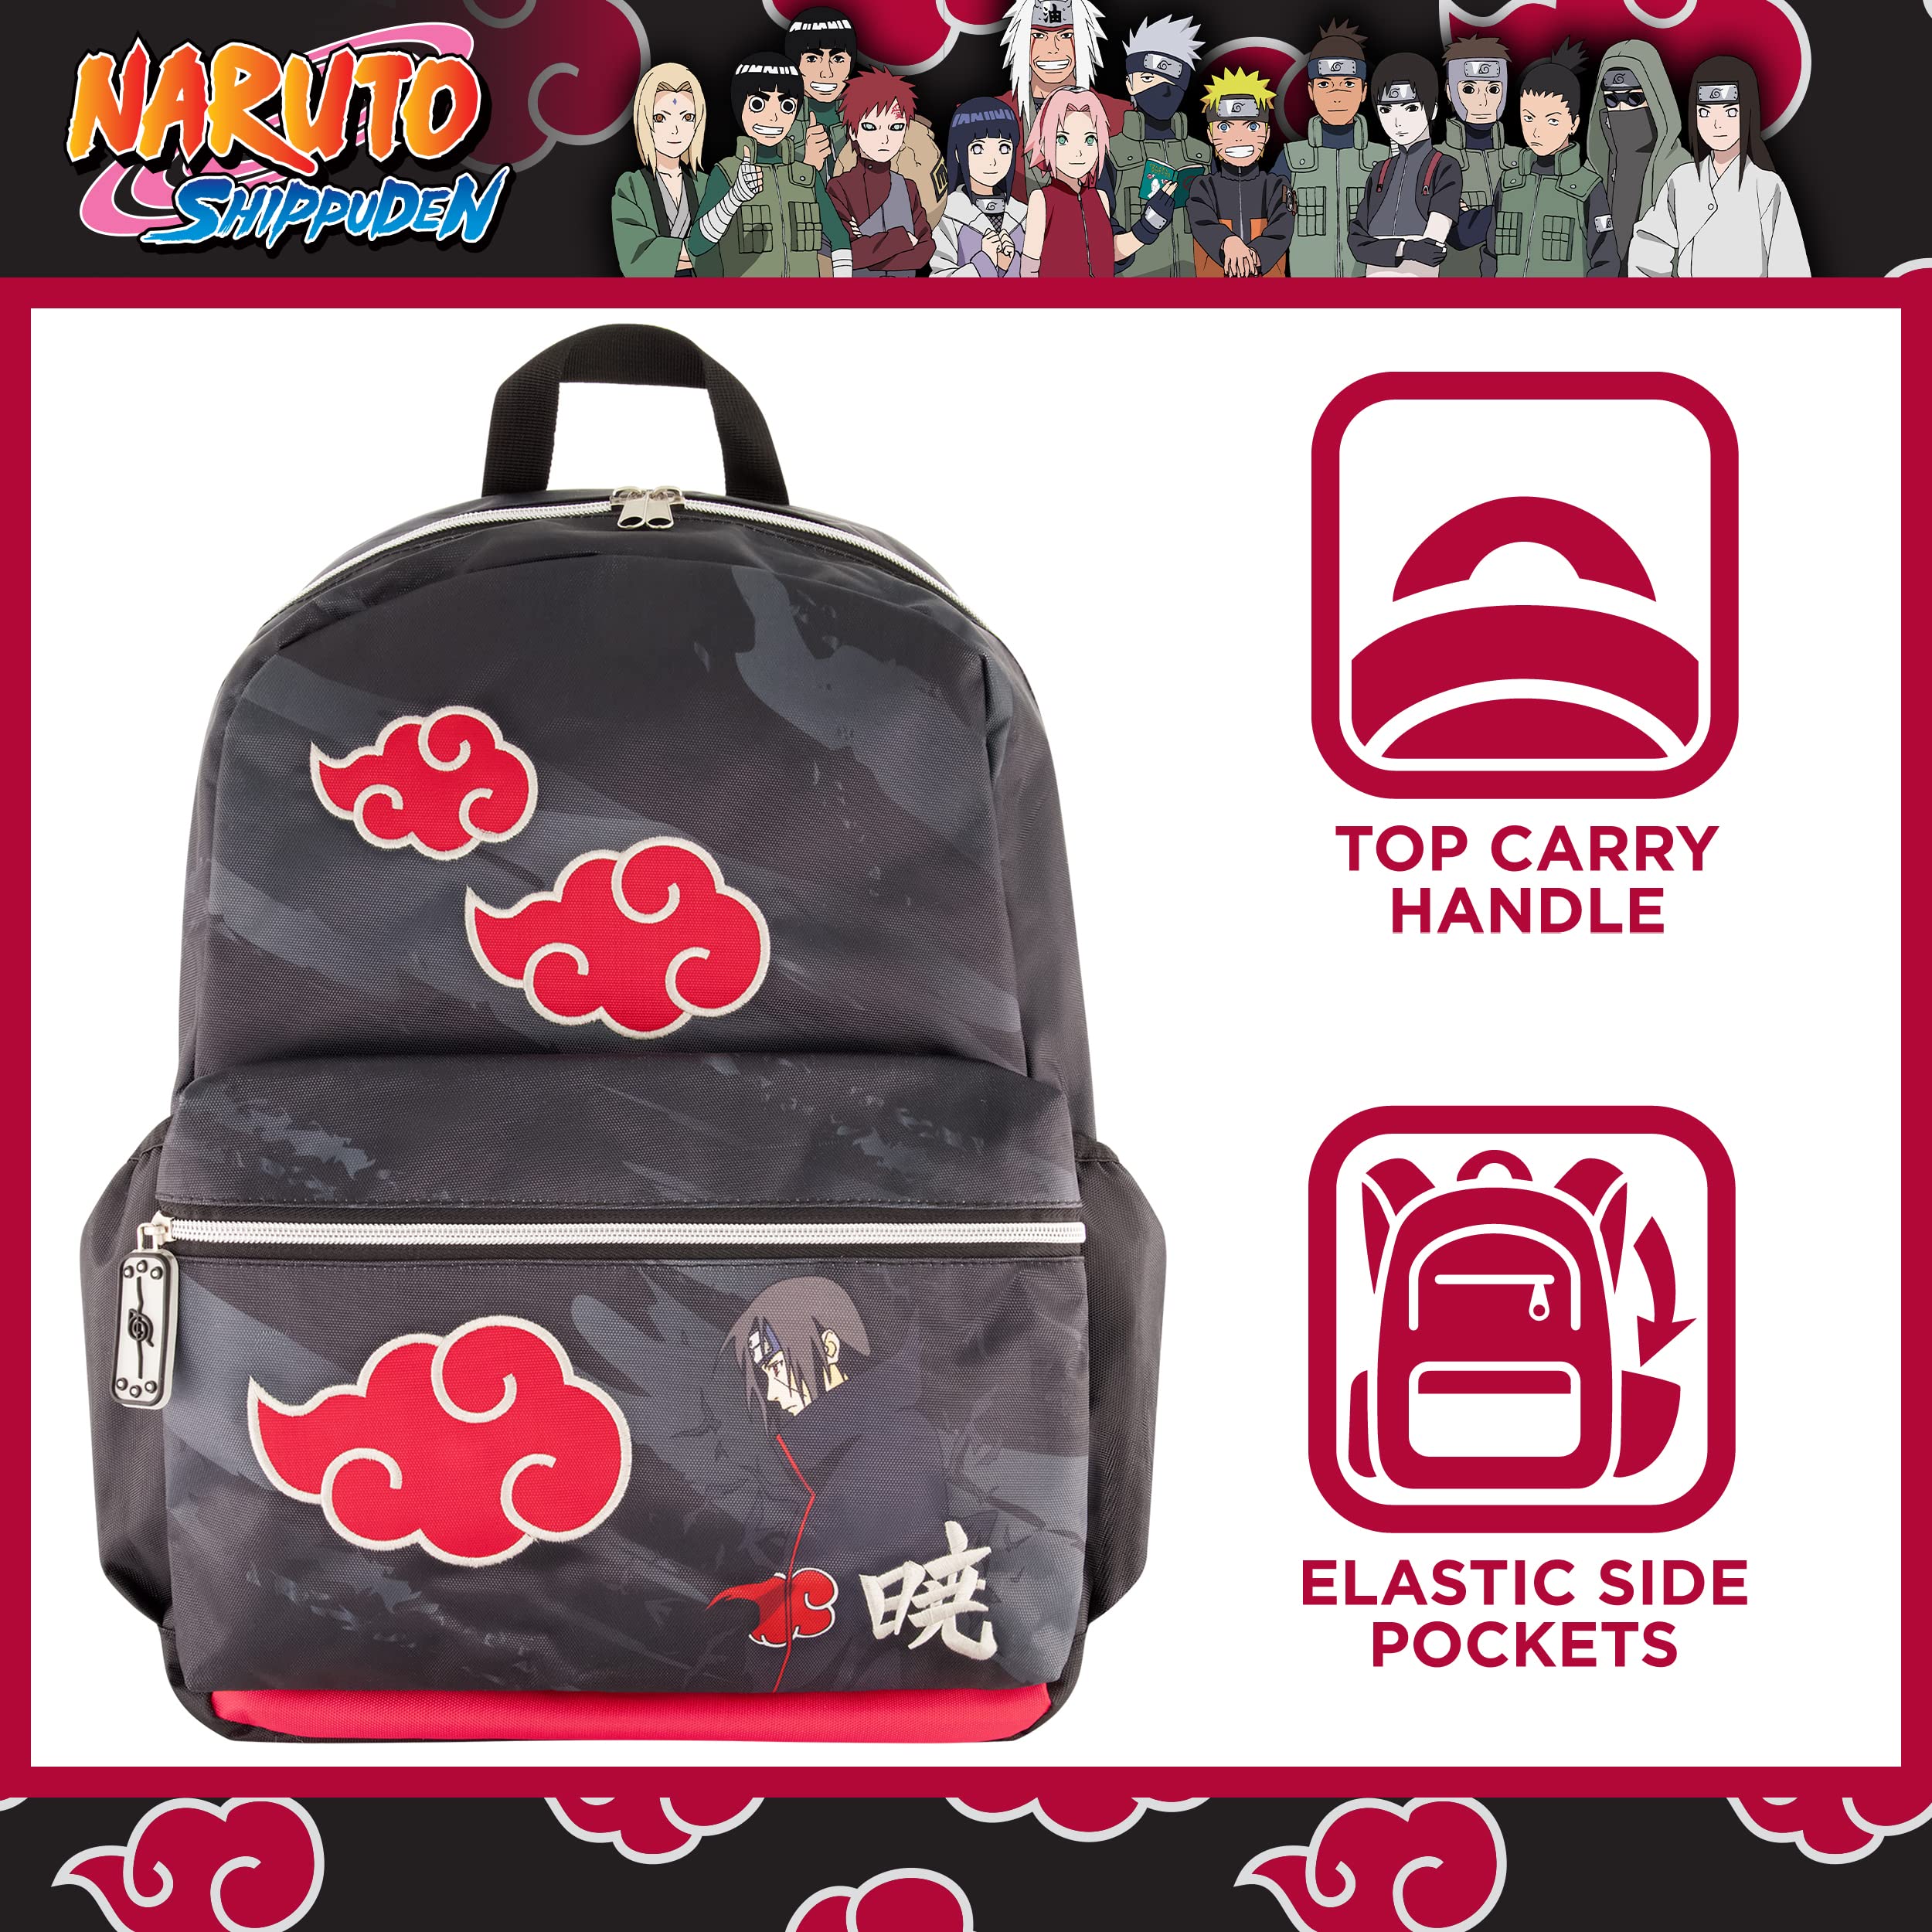 Naruto 13 Inch Sleeve Laptop Backpack, Padded Computer Bag for Commute or Travel, Akatsuki Itachi, One Size